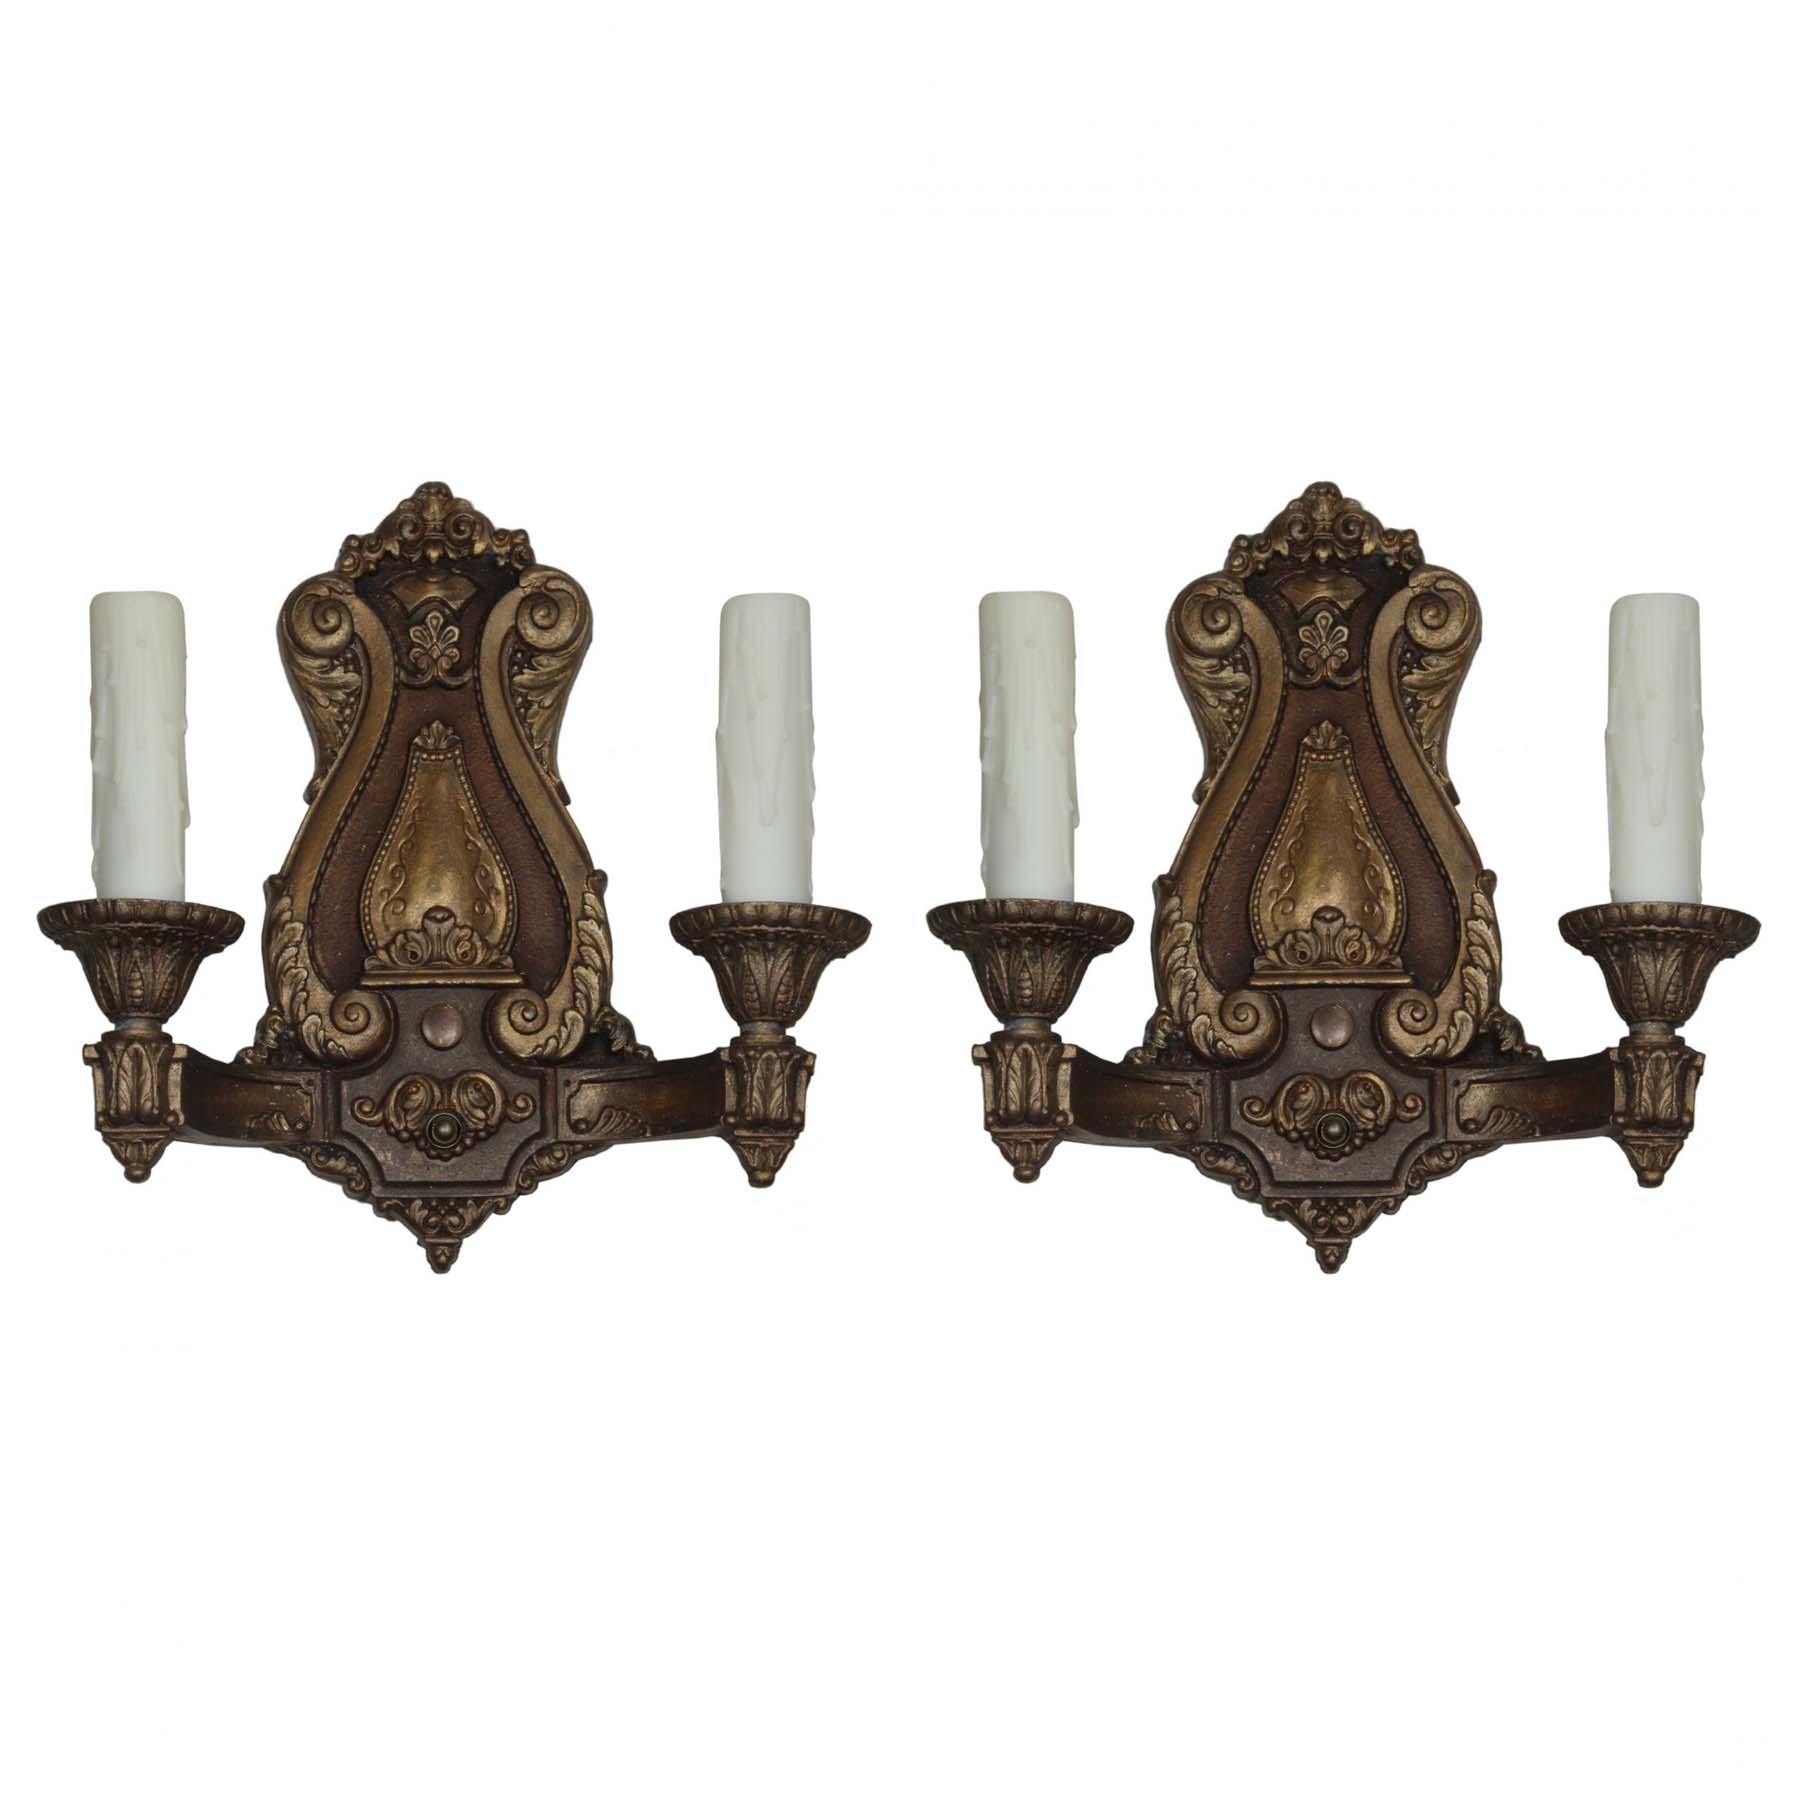 SOLD Pair of Antique Neoclassical Double-Arm Sconces-0